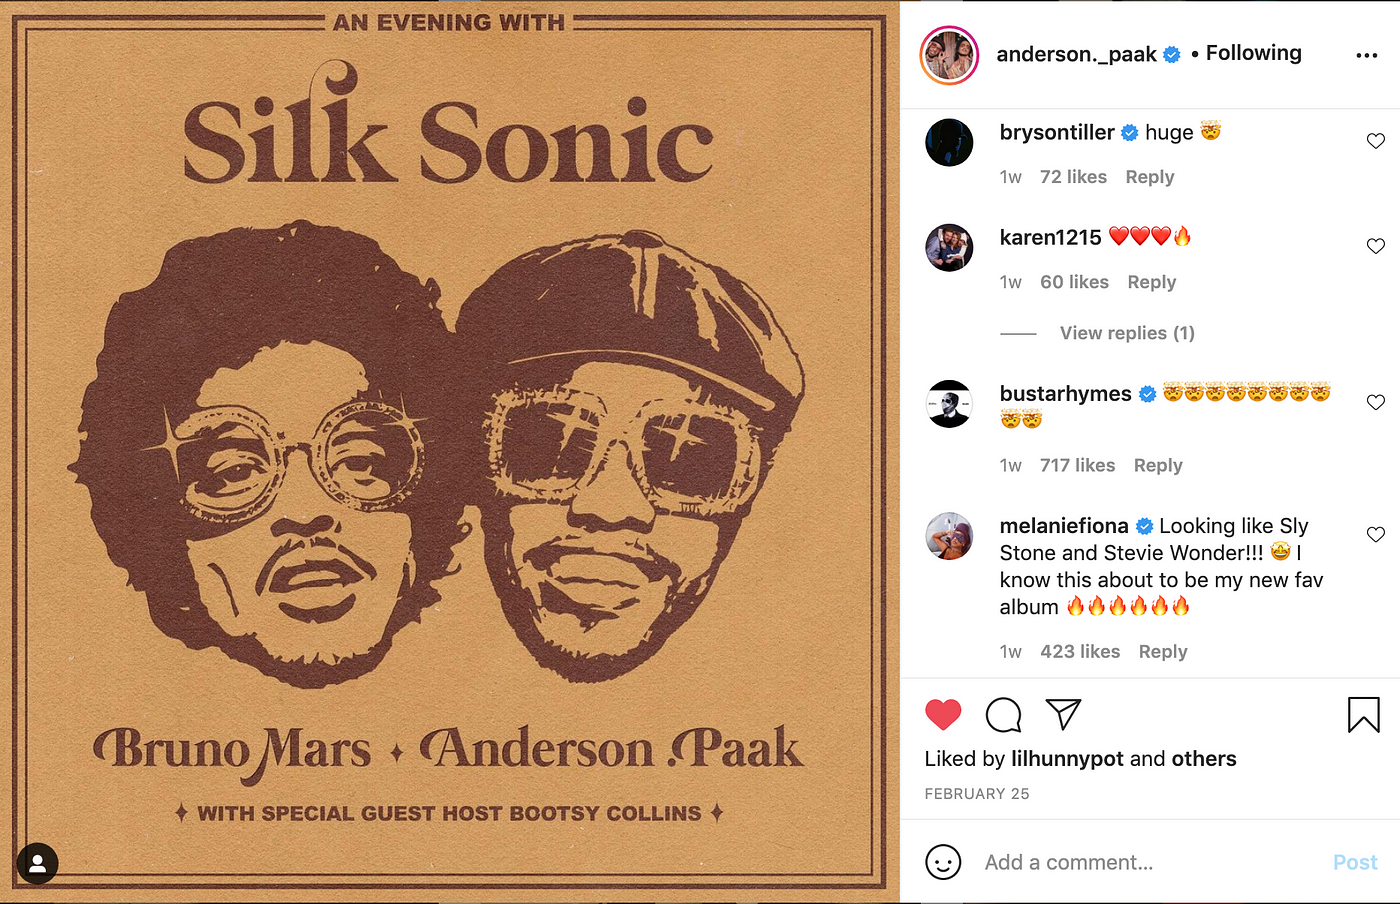 Bruno Mars, Anderson. Paak, Bootsy Collins team for new music